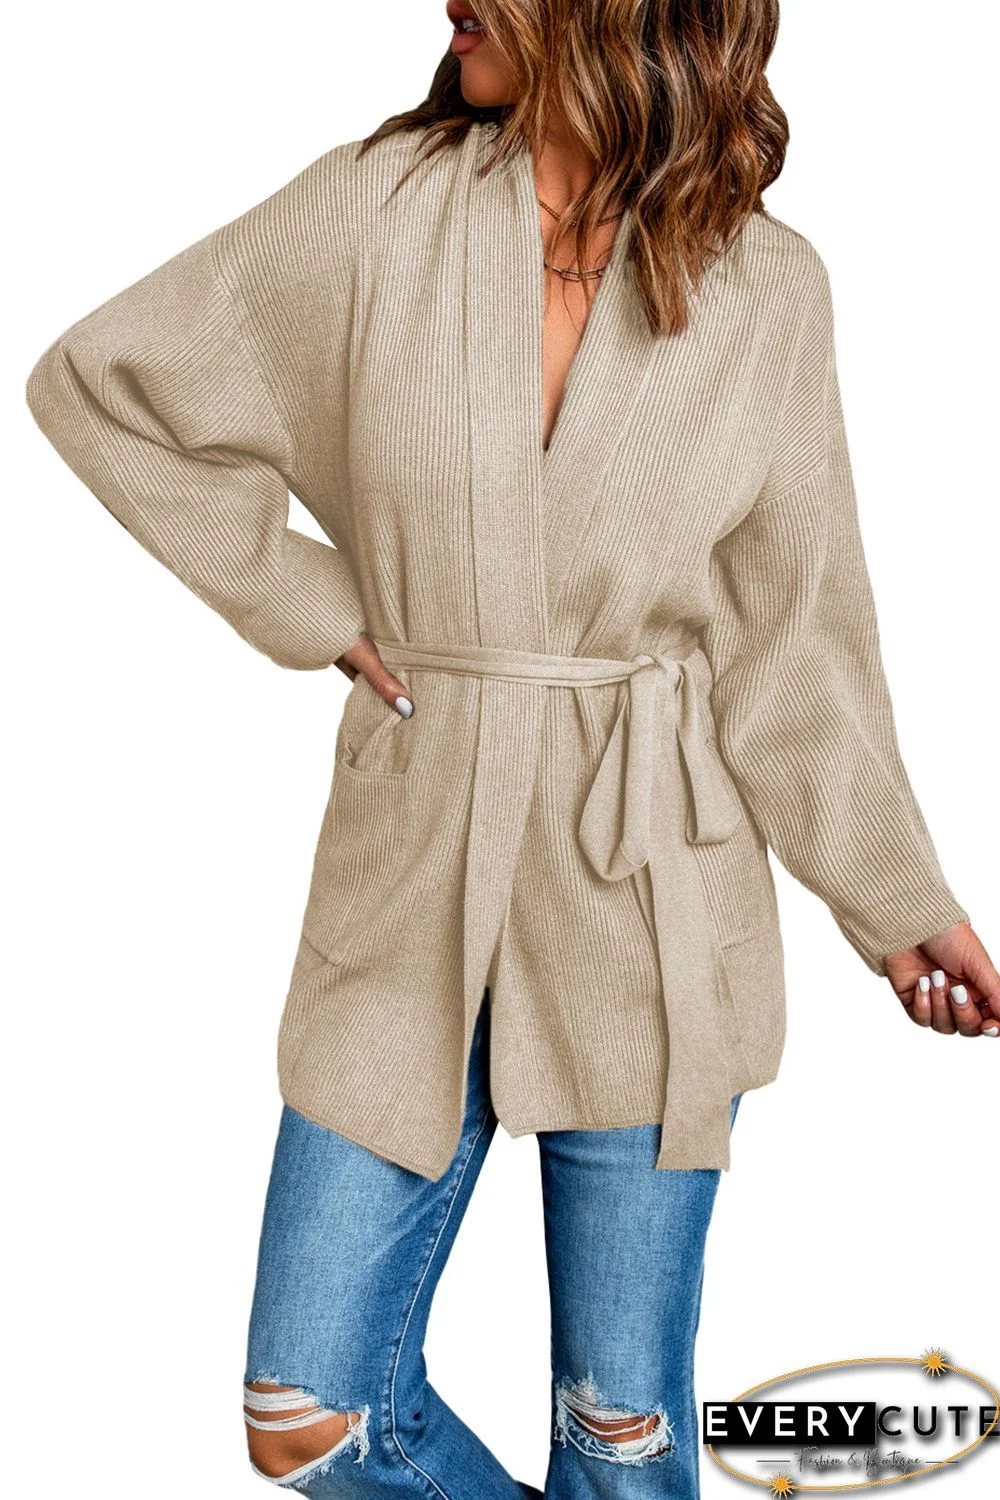 Apricot Robe Style Rib Knit Pocketed Cardigan with Belt